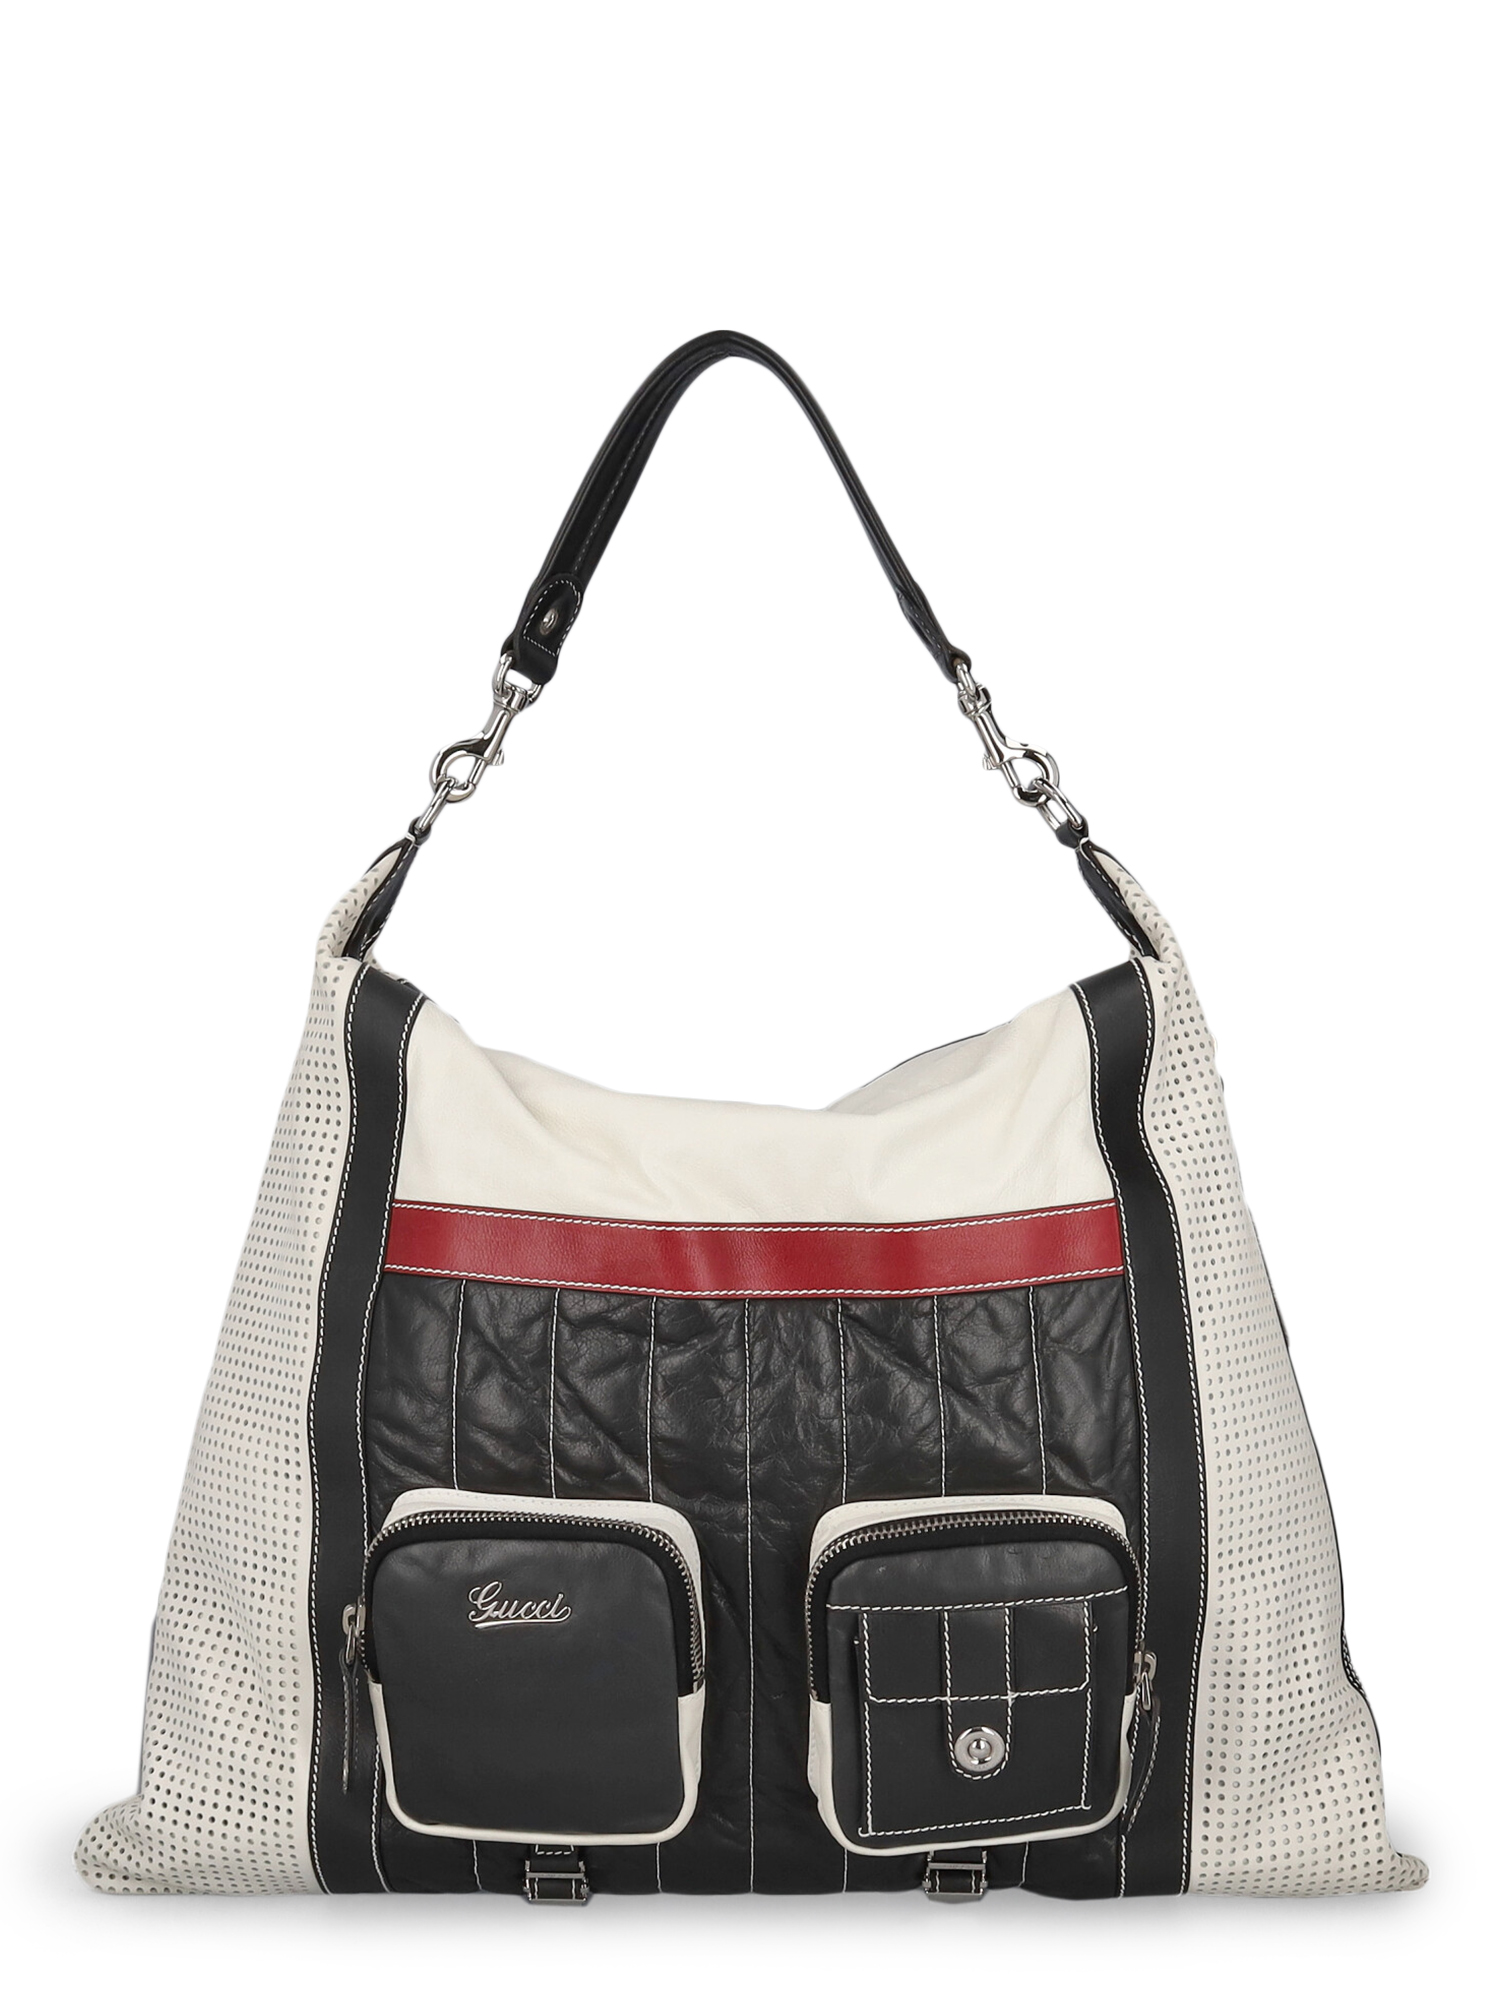 Pre-owned Gucci Women's Handbags -  - In Black, Red, White Leather